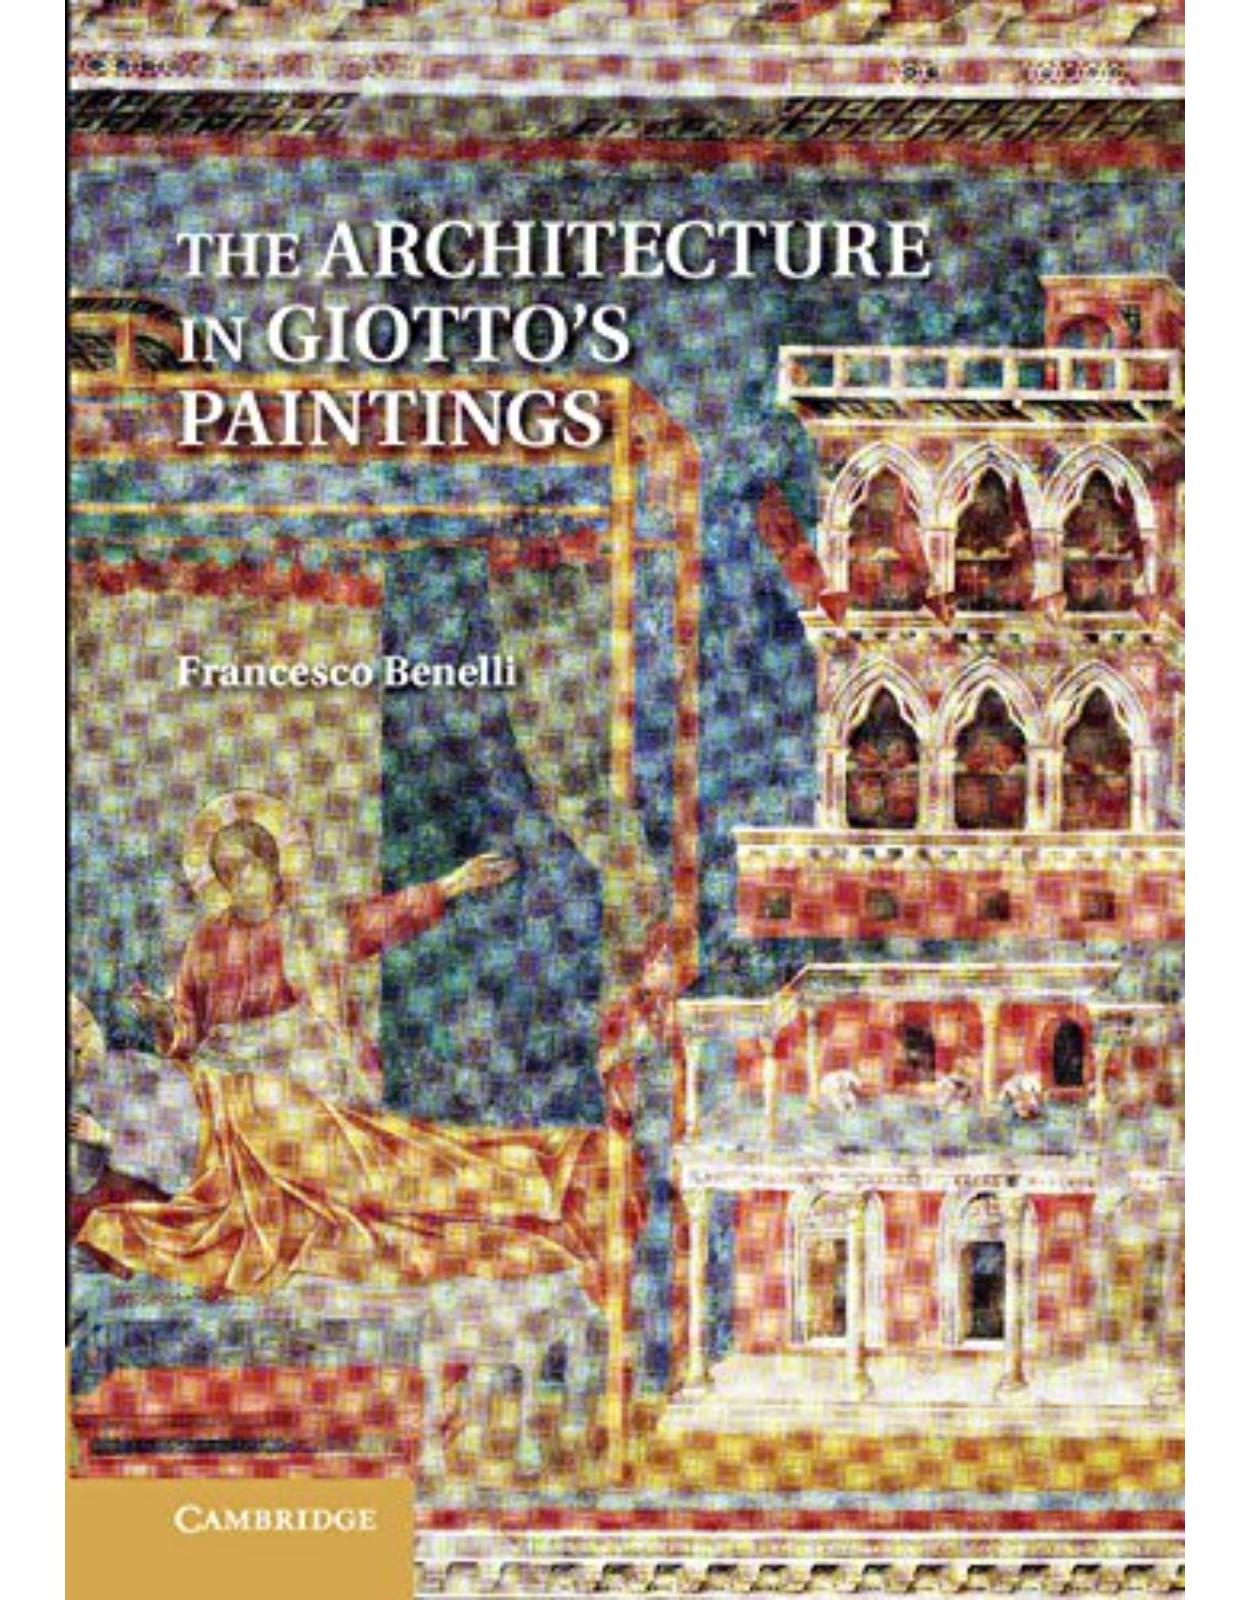 The Architecture in Giotto's Paintings